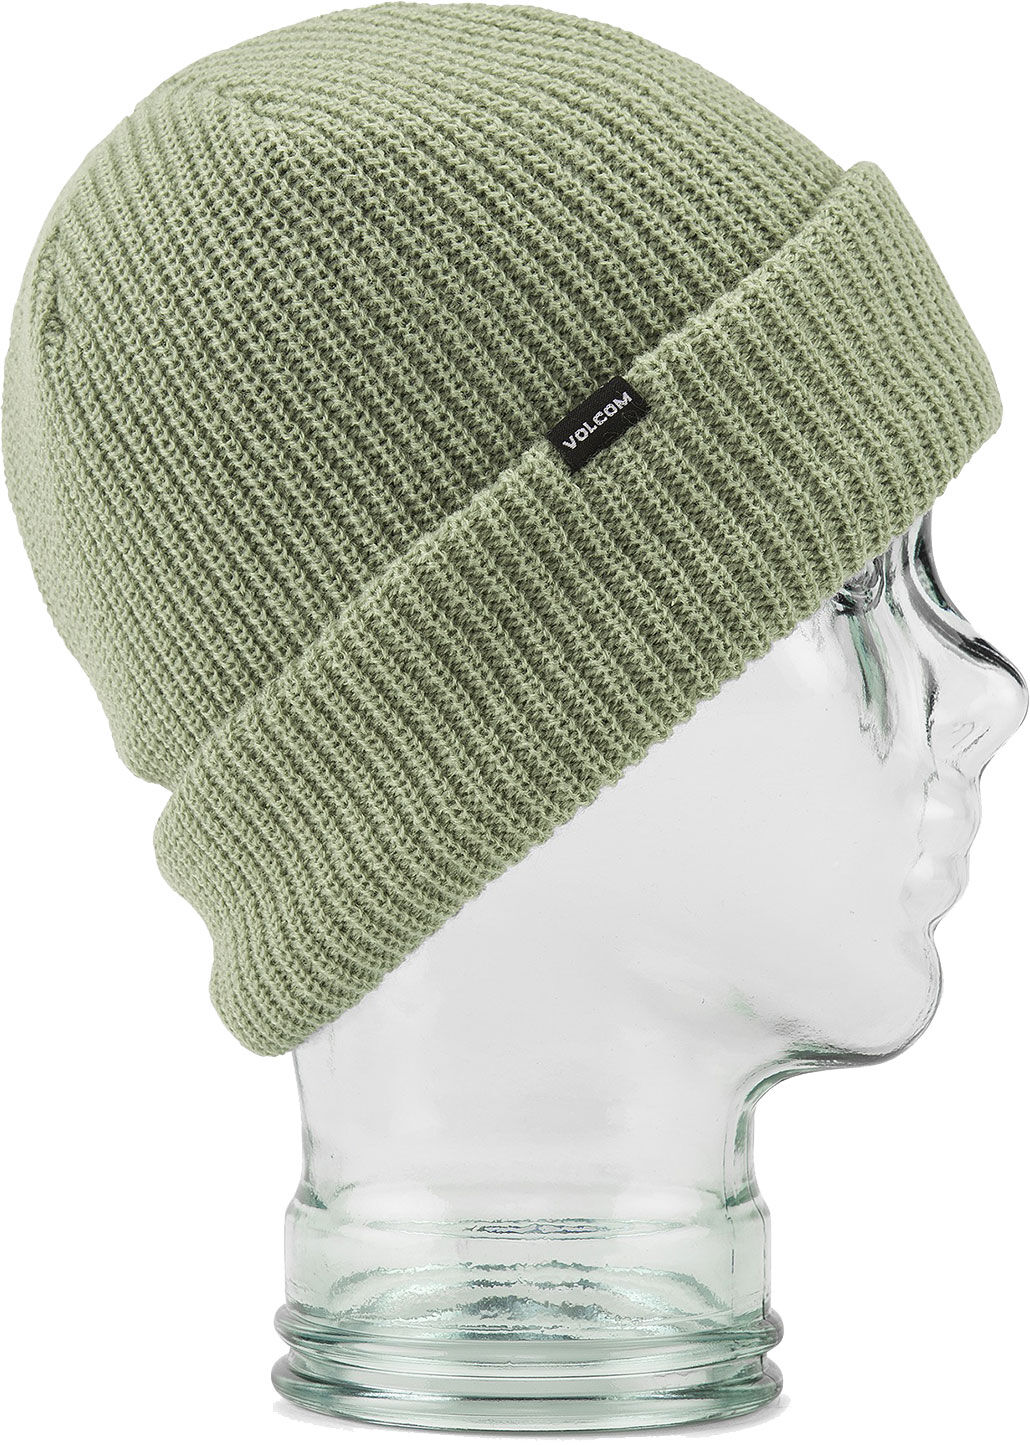 Volcom SWEEP LINED BEANIE LIGHT MILITARY One Size